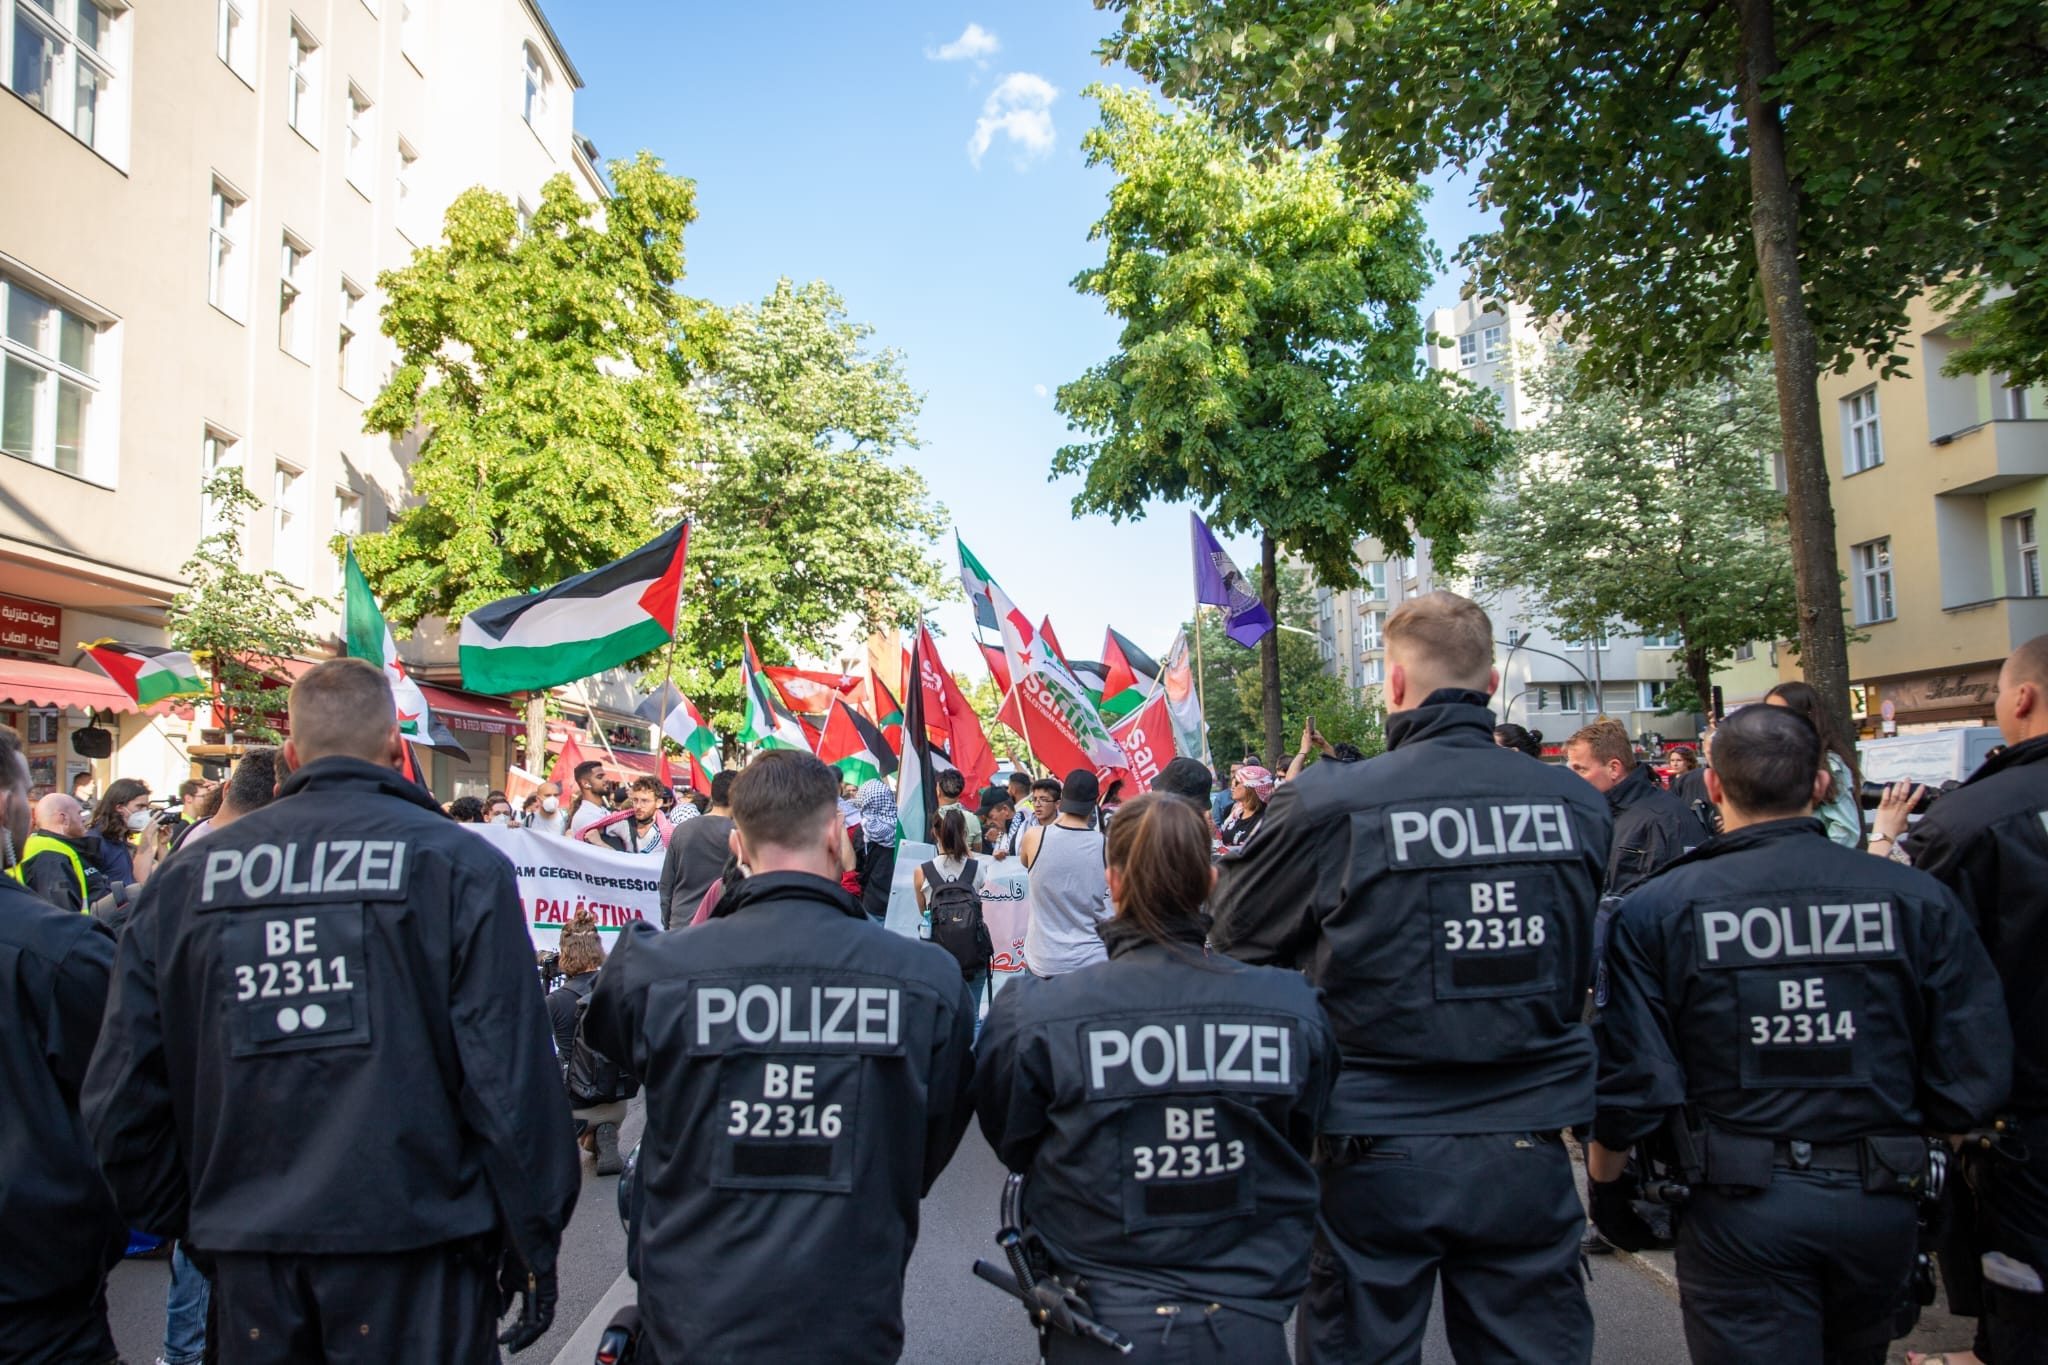 Over 900 Police in Berlin Dispatched to Shut Down A Pro-Palestine Conference of 250 People